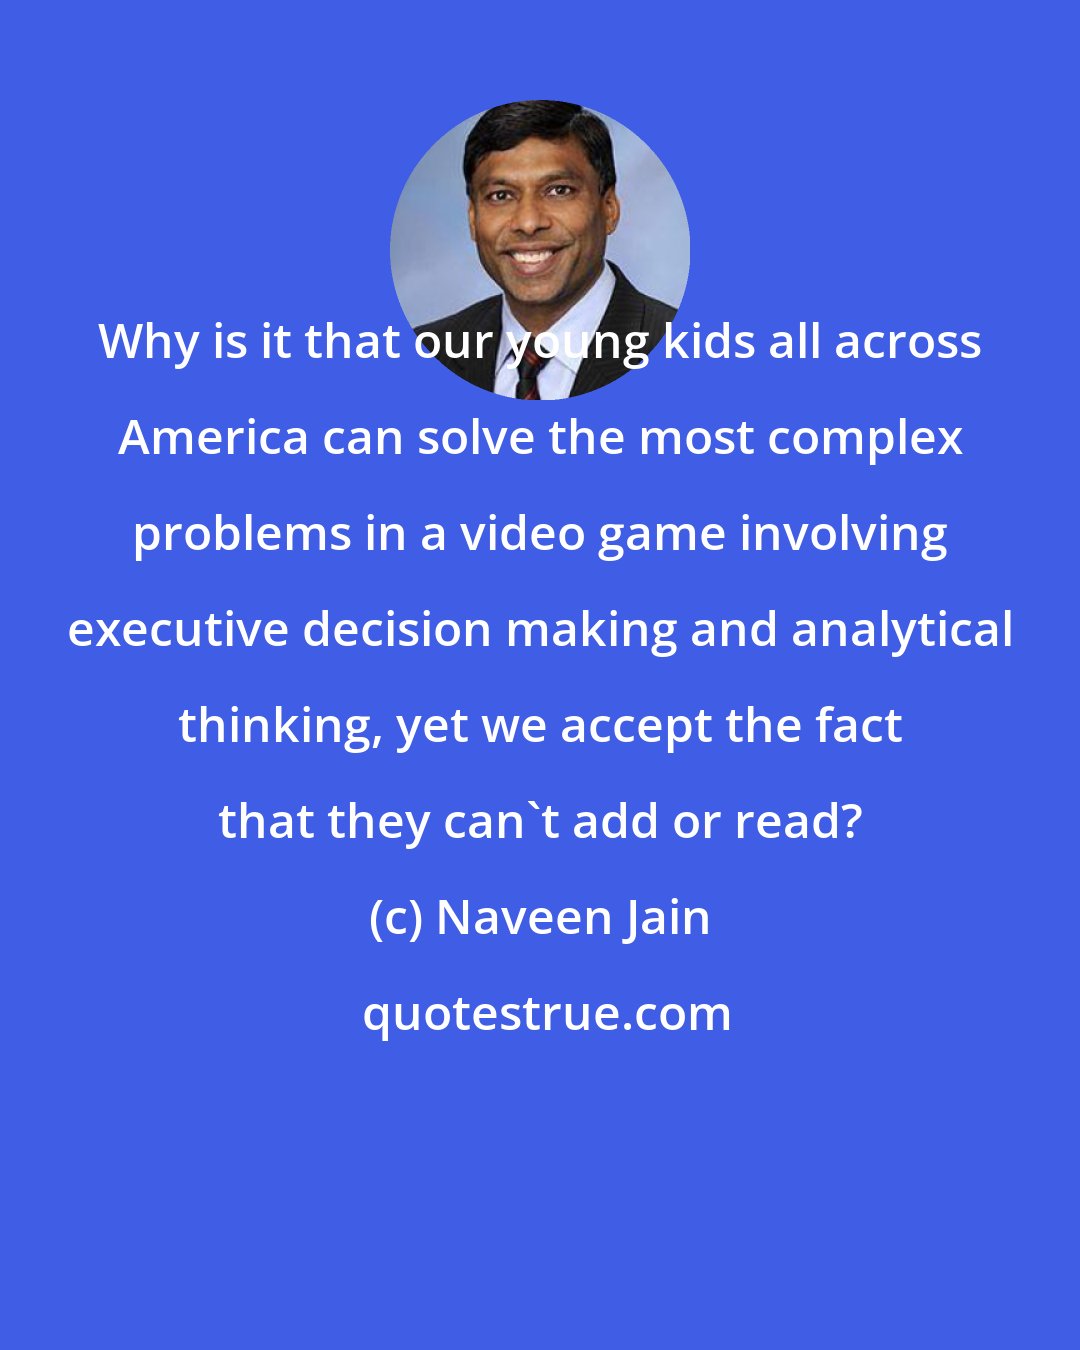 Naveen Jain: Why is it that our young kids all across America can solve the most complex problems in a video game involving executive decision making and analytical thinking, yet we accept the fact that they can't add or read?